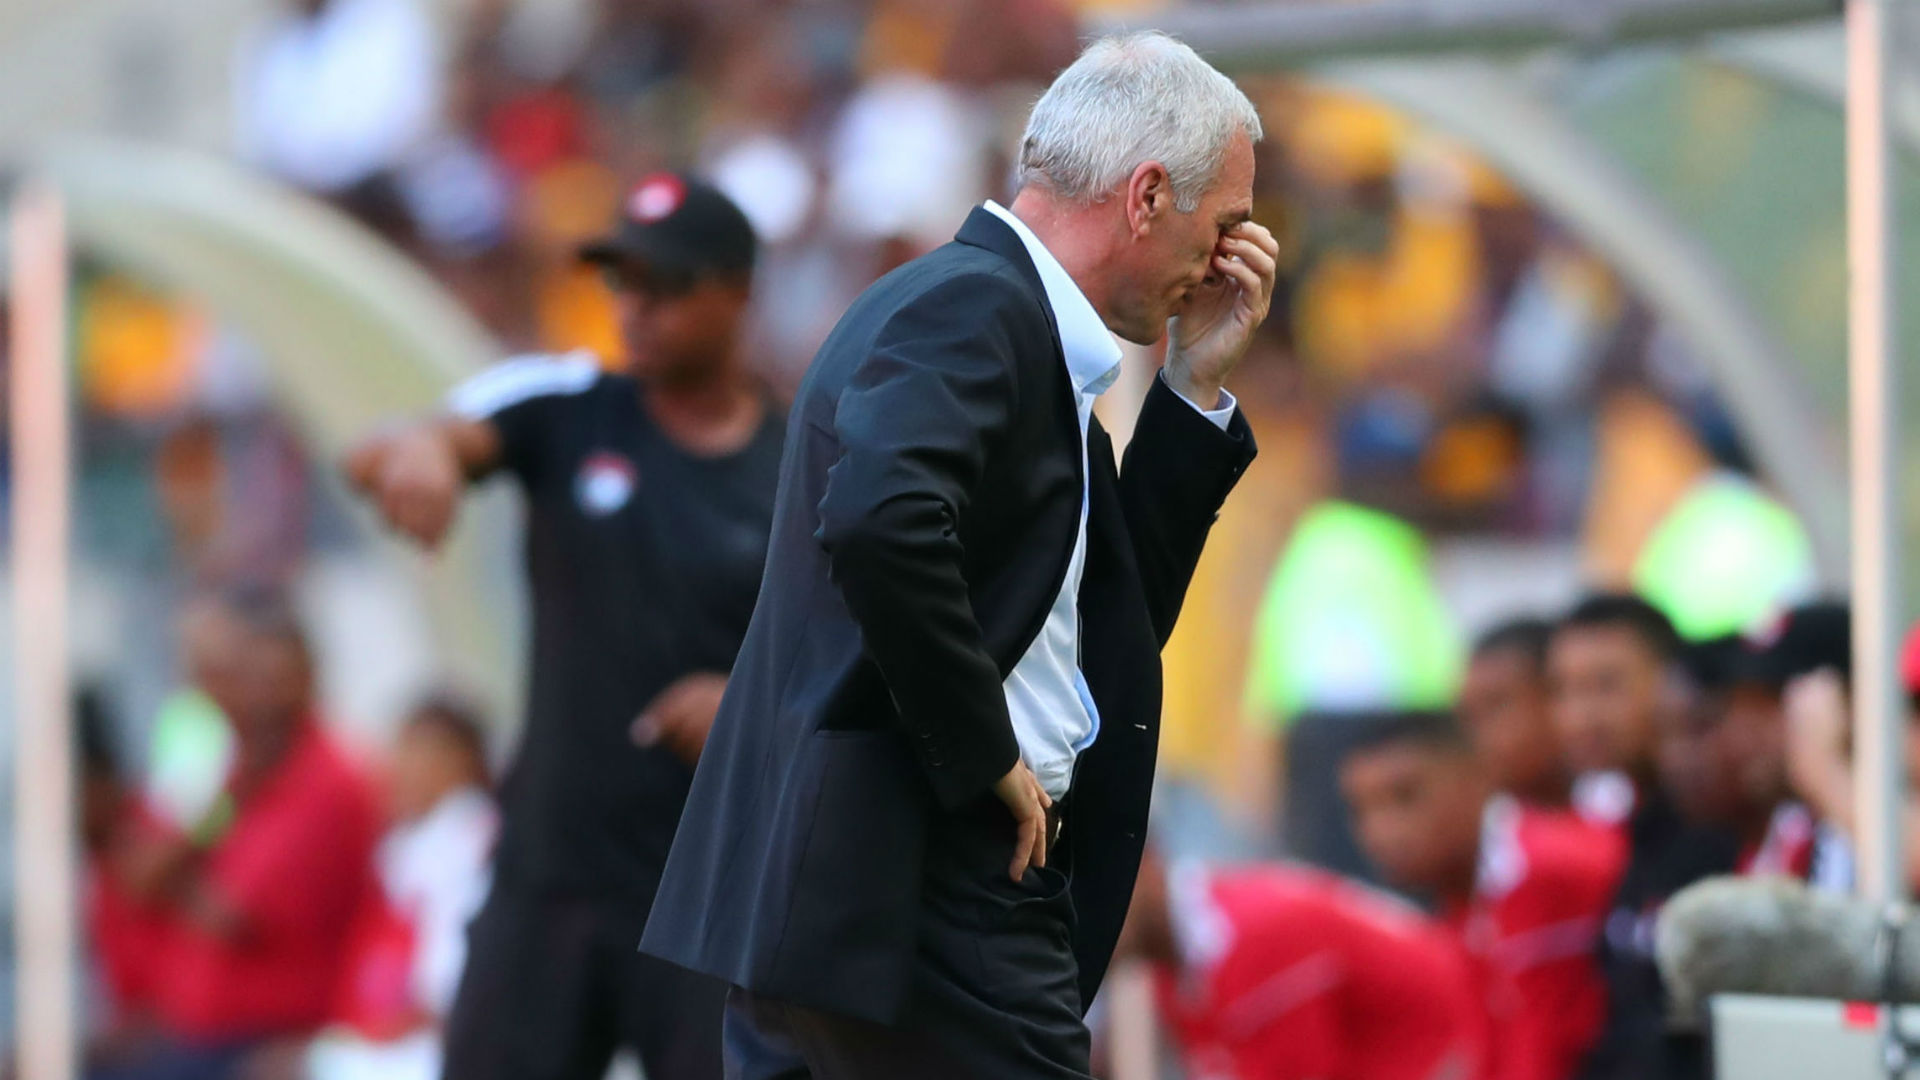 We messed it up - Kaizer Chiefs coach Middendorp after his side blew up chance to extend lead